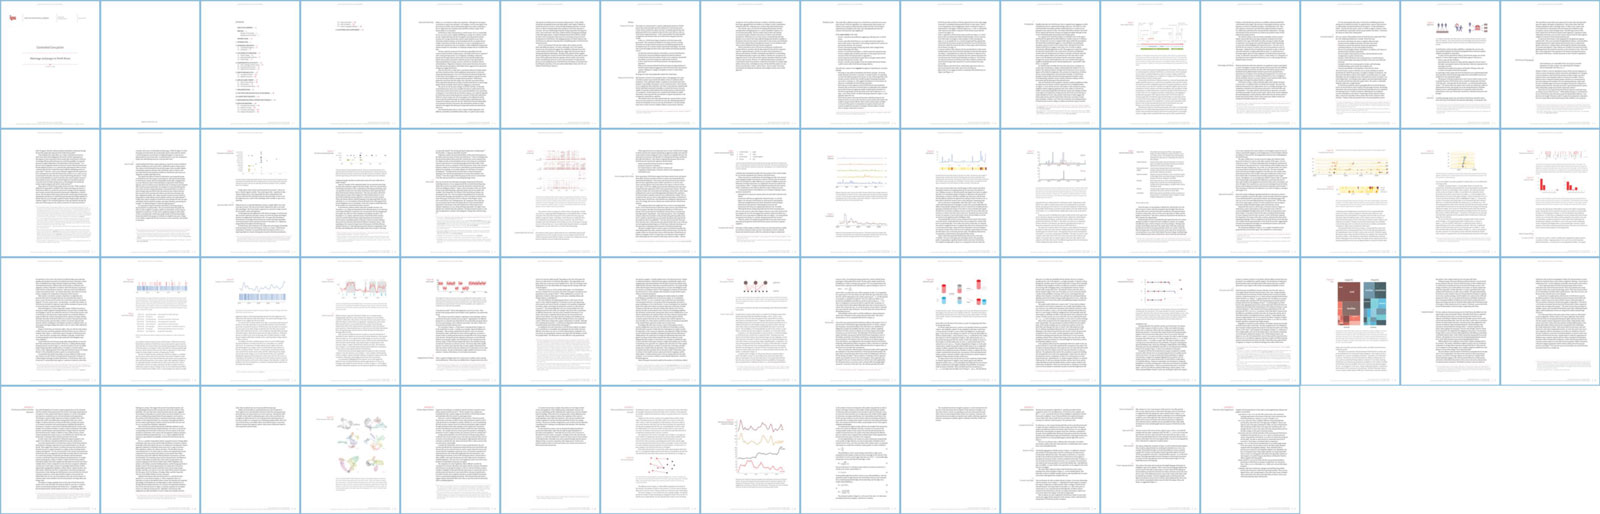 thumbnails of pages from a typical report